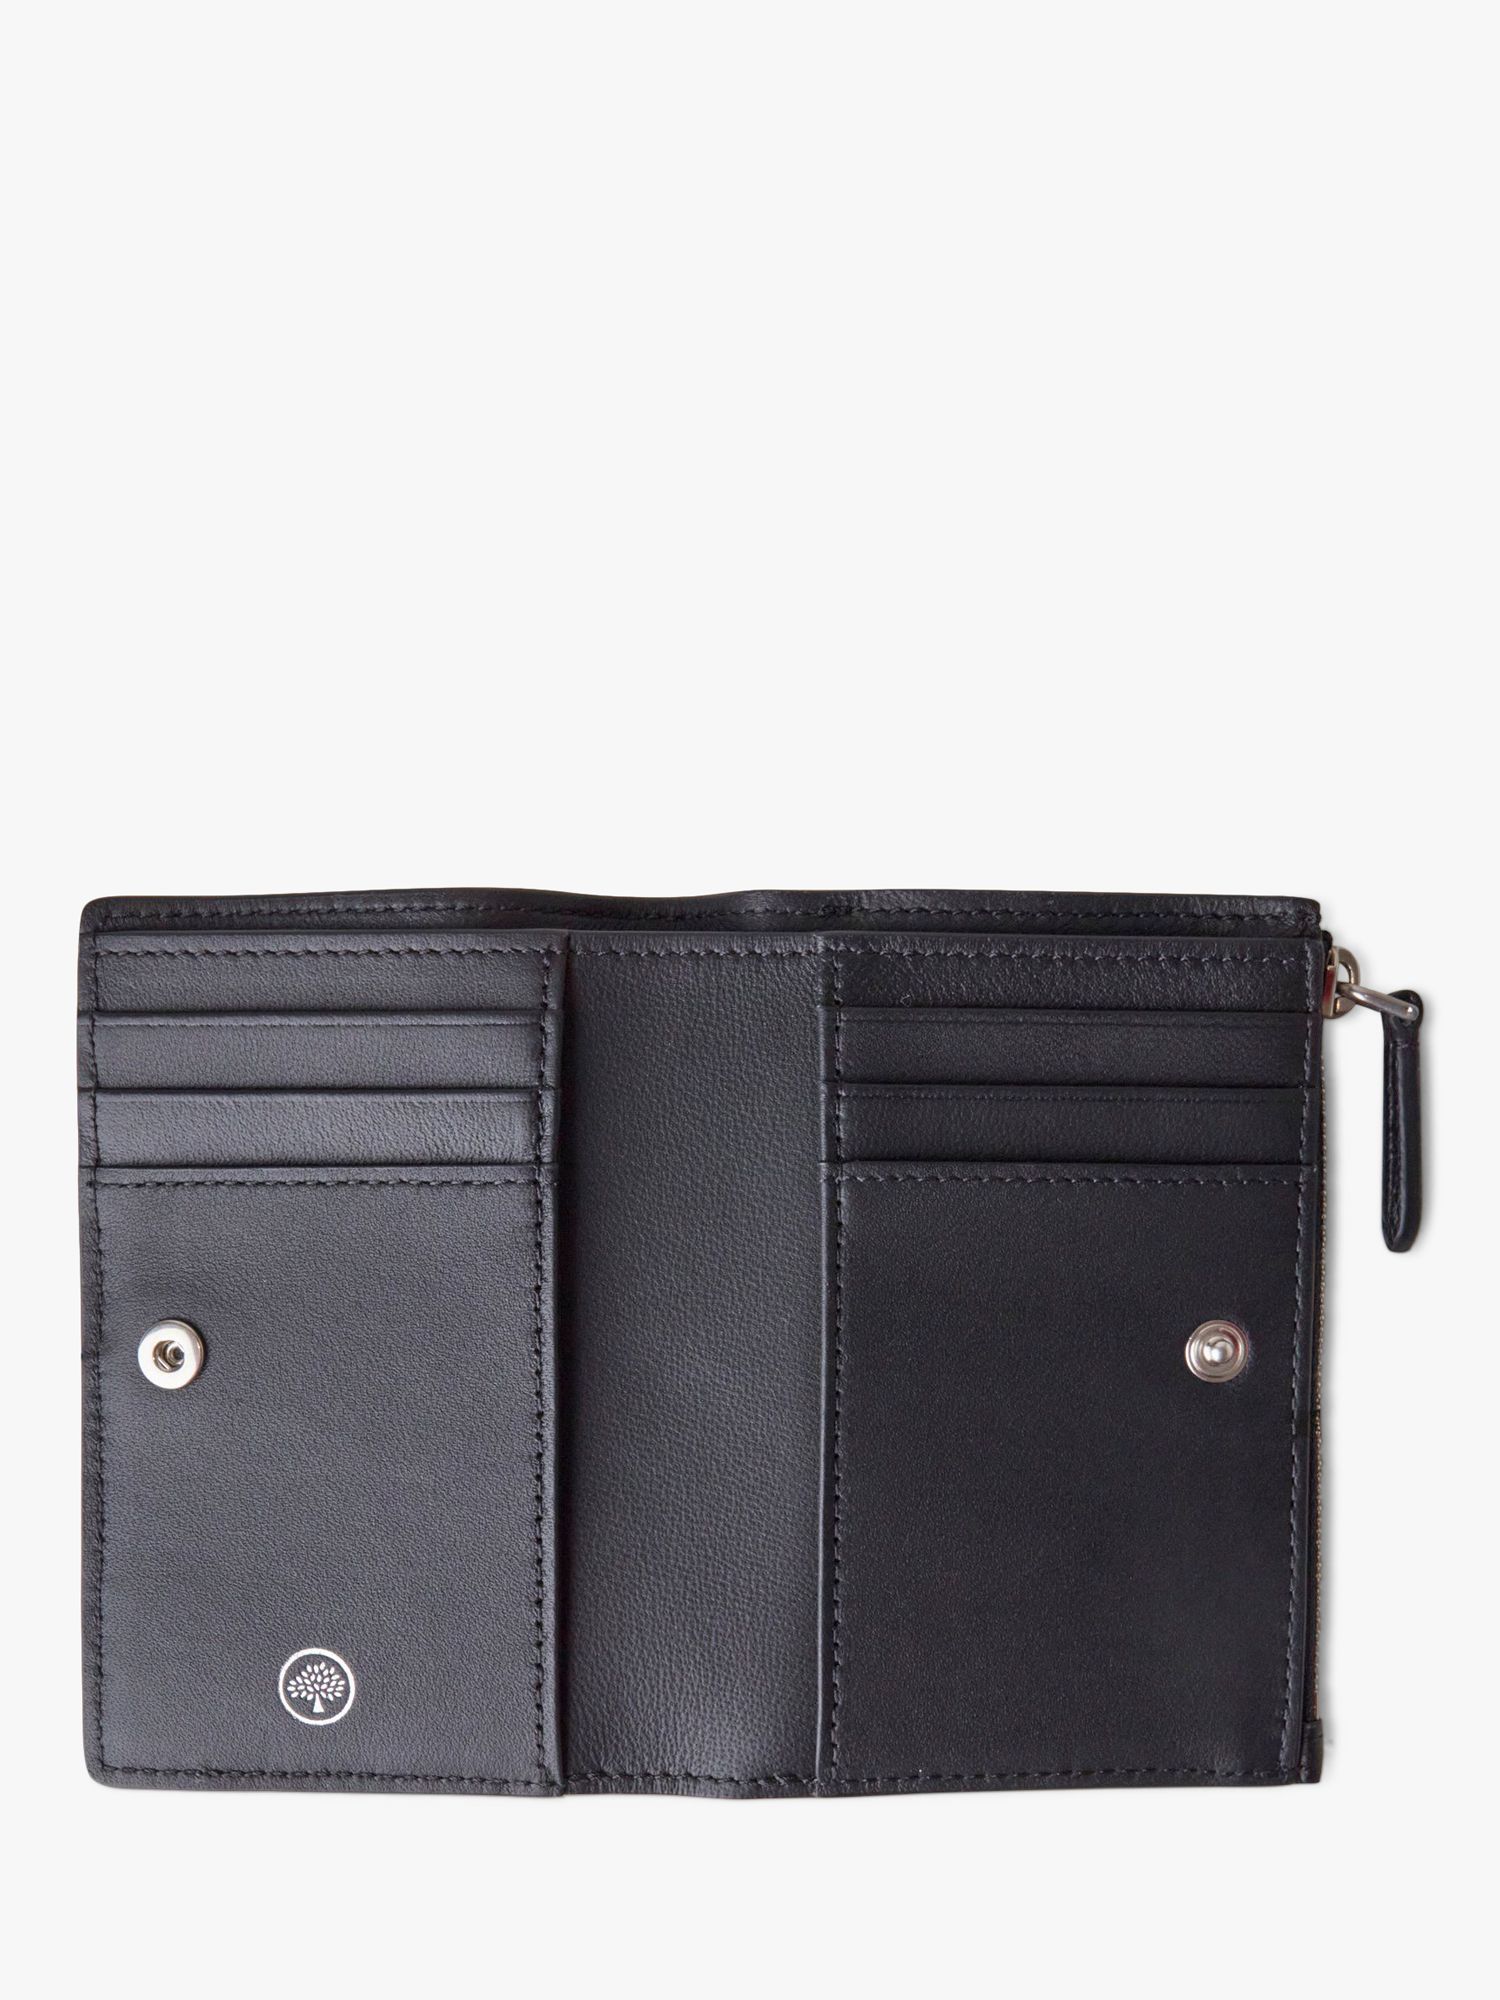 Buy Mulberry Continental Bifold Wallet, Black Online at johnlewis.com